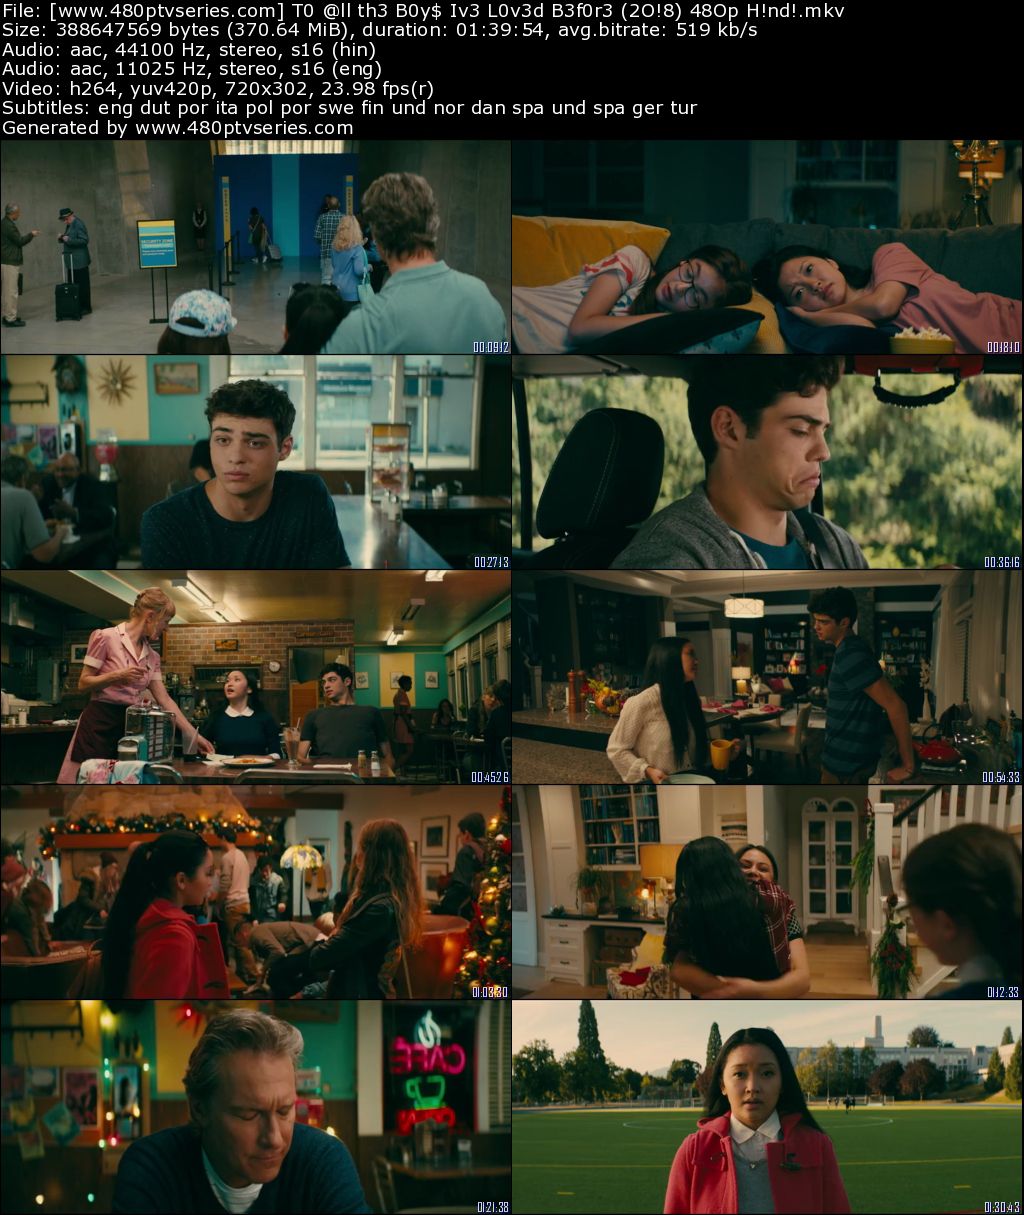 To All the Boys I've Loved Before (2018) 350MB Full Hindi Dual Audio Movie Download 480p Web-DL Free Watch Online Full Movie Download Worldfree4u 9xmovies